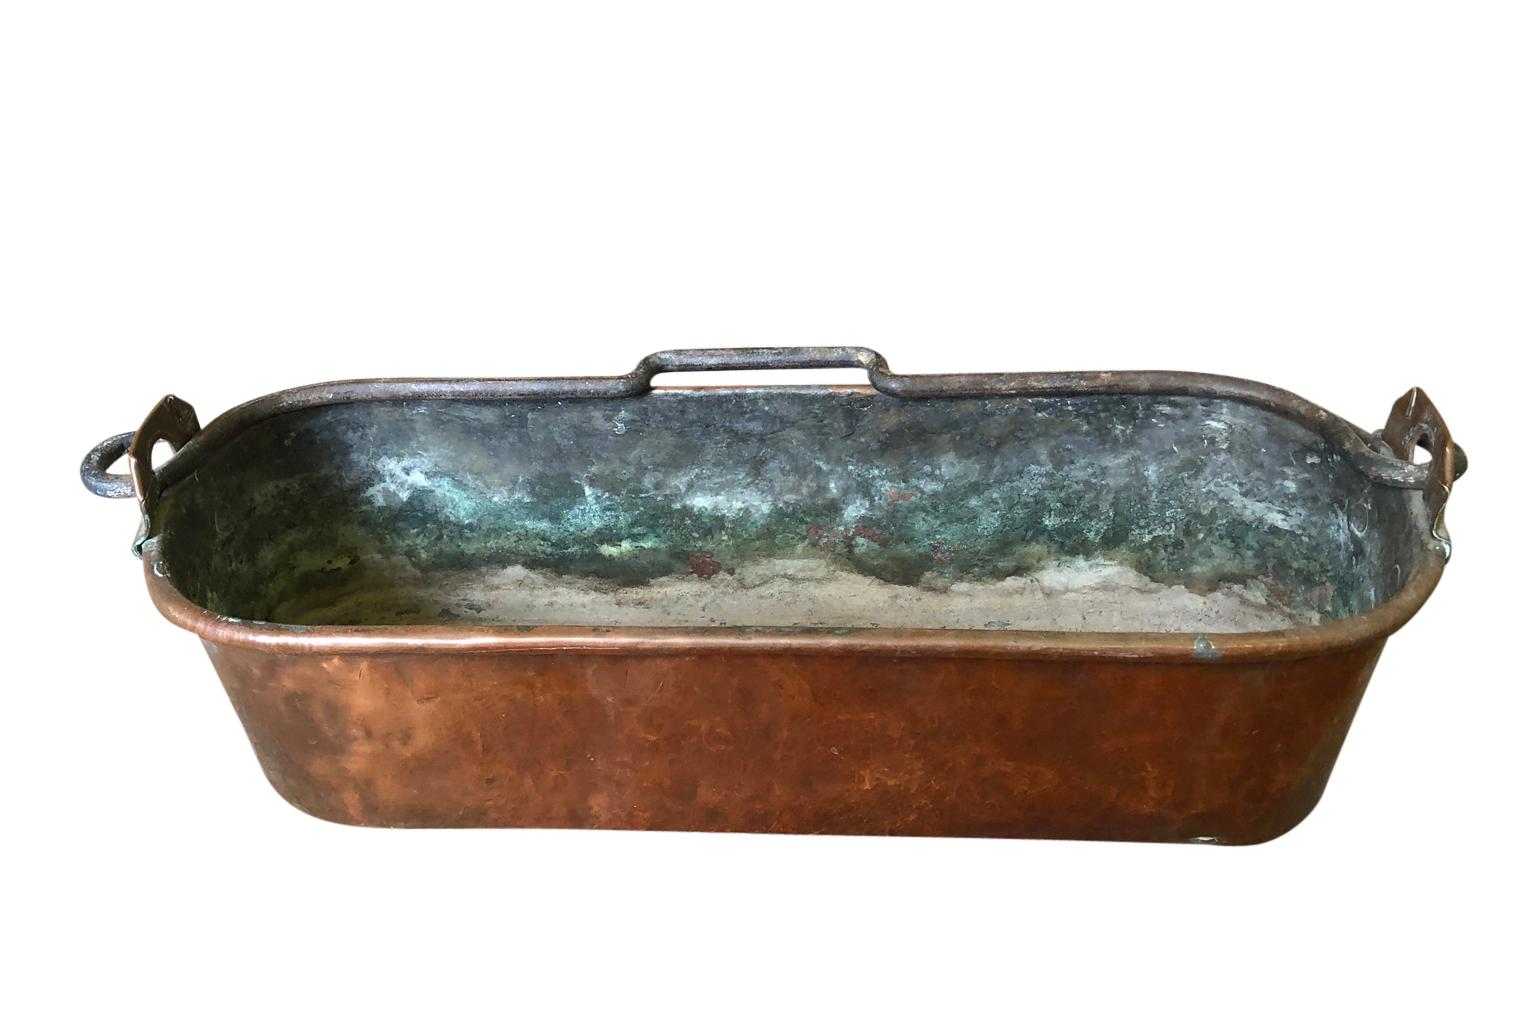 A very lovely mid-19th century copper fish pan - poissoniere - from the South of France. A terrific accent piece for a kitchen, bathroom or living area.